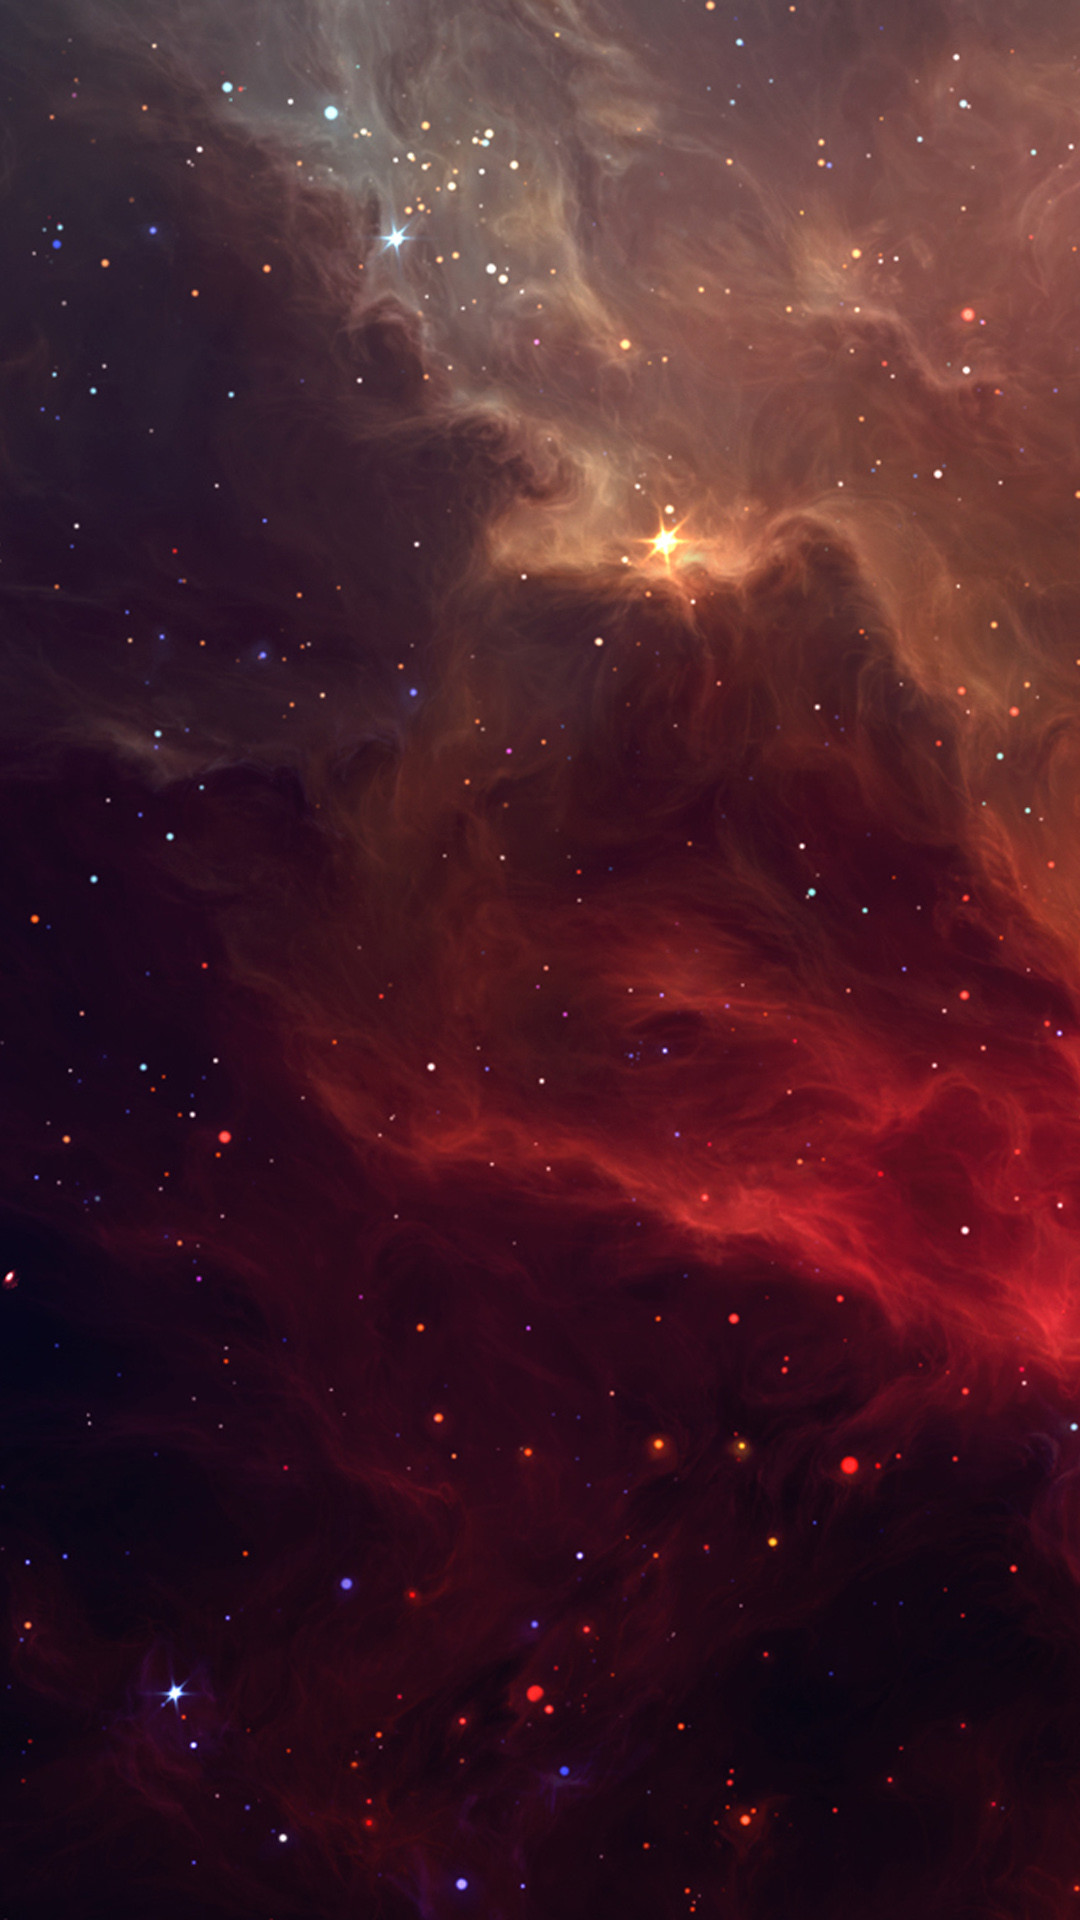 1080x1920 Red Galactic Nebula Wallpapers for Galaxy S5.jpg